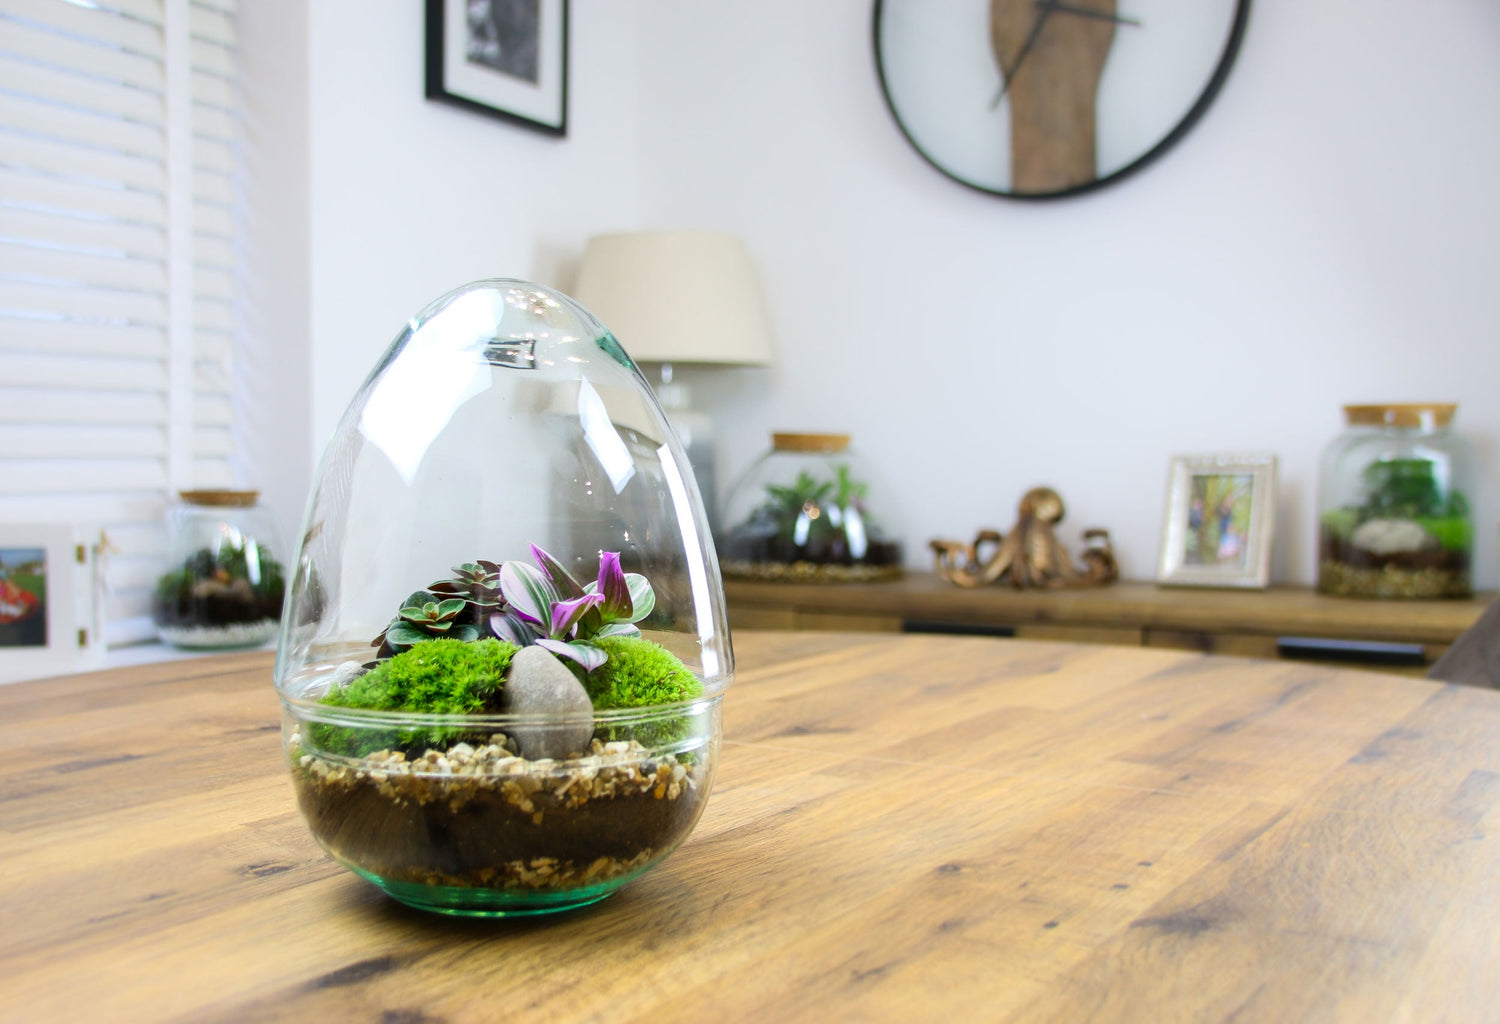 Egg shaped Closed Terrarium kit to build at home